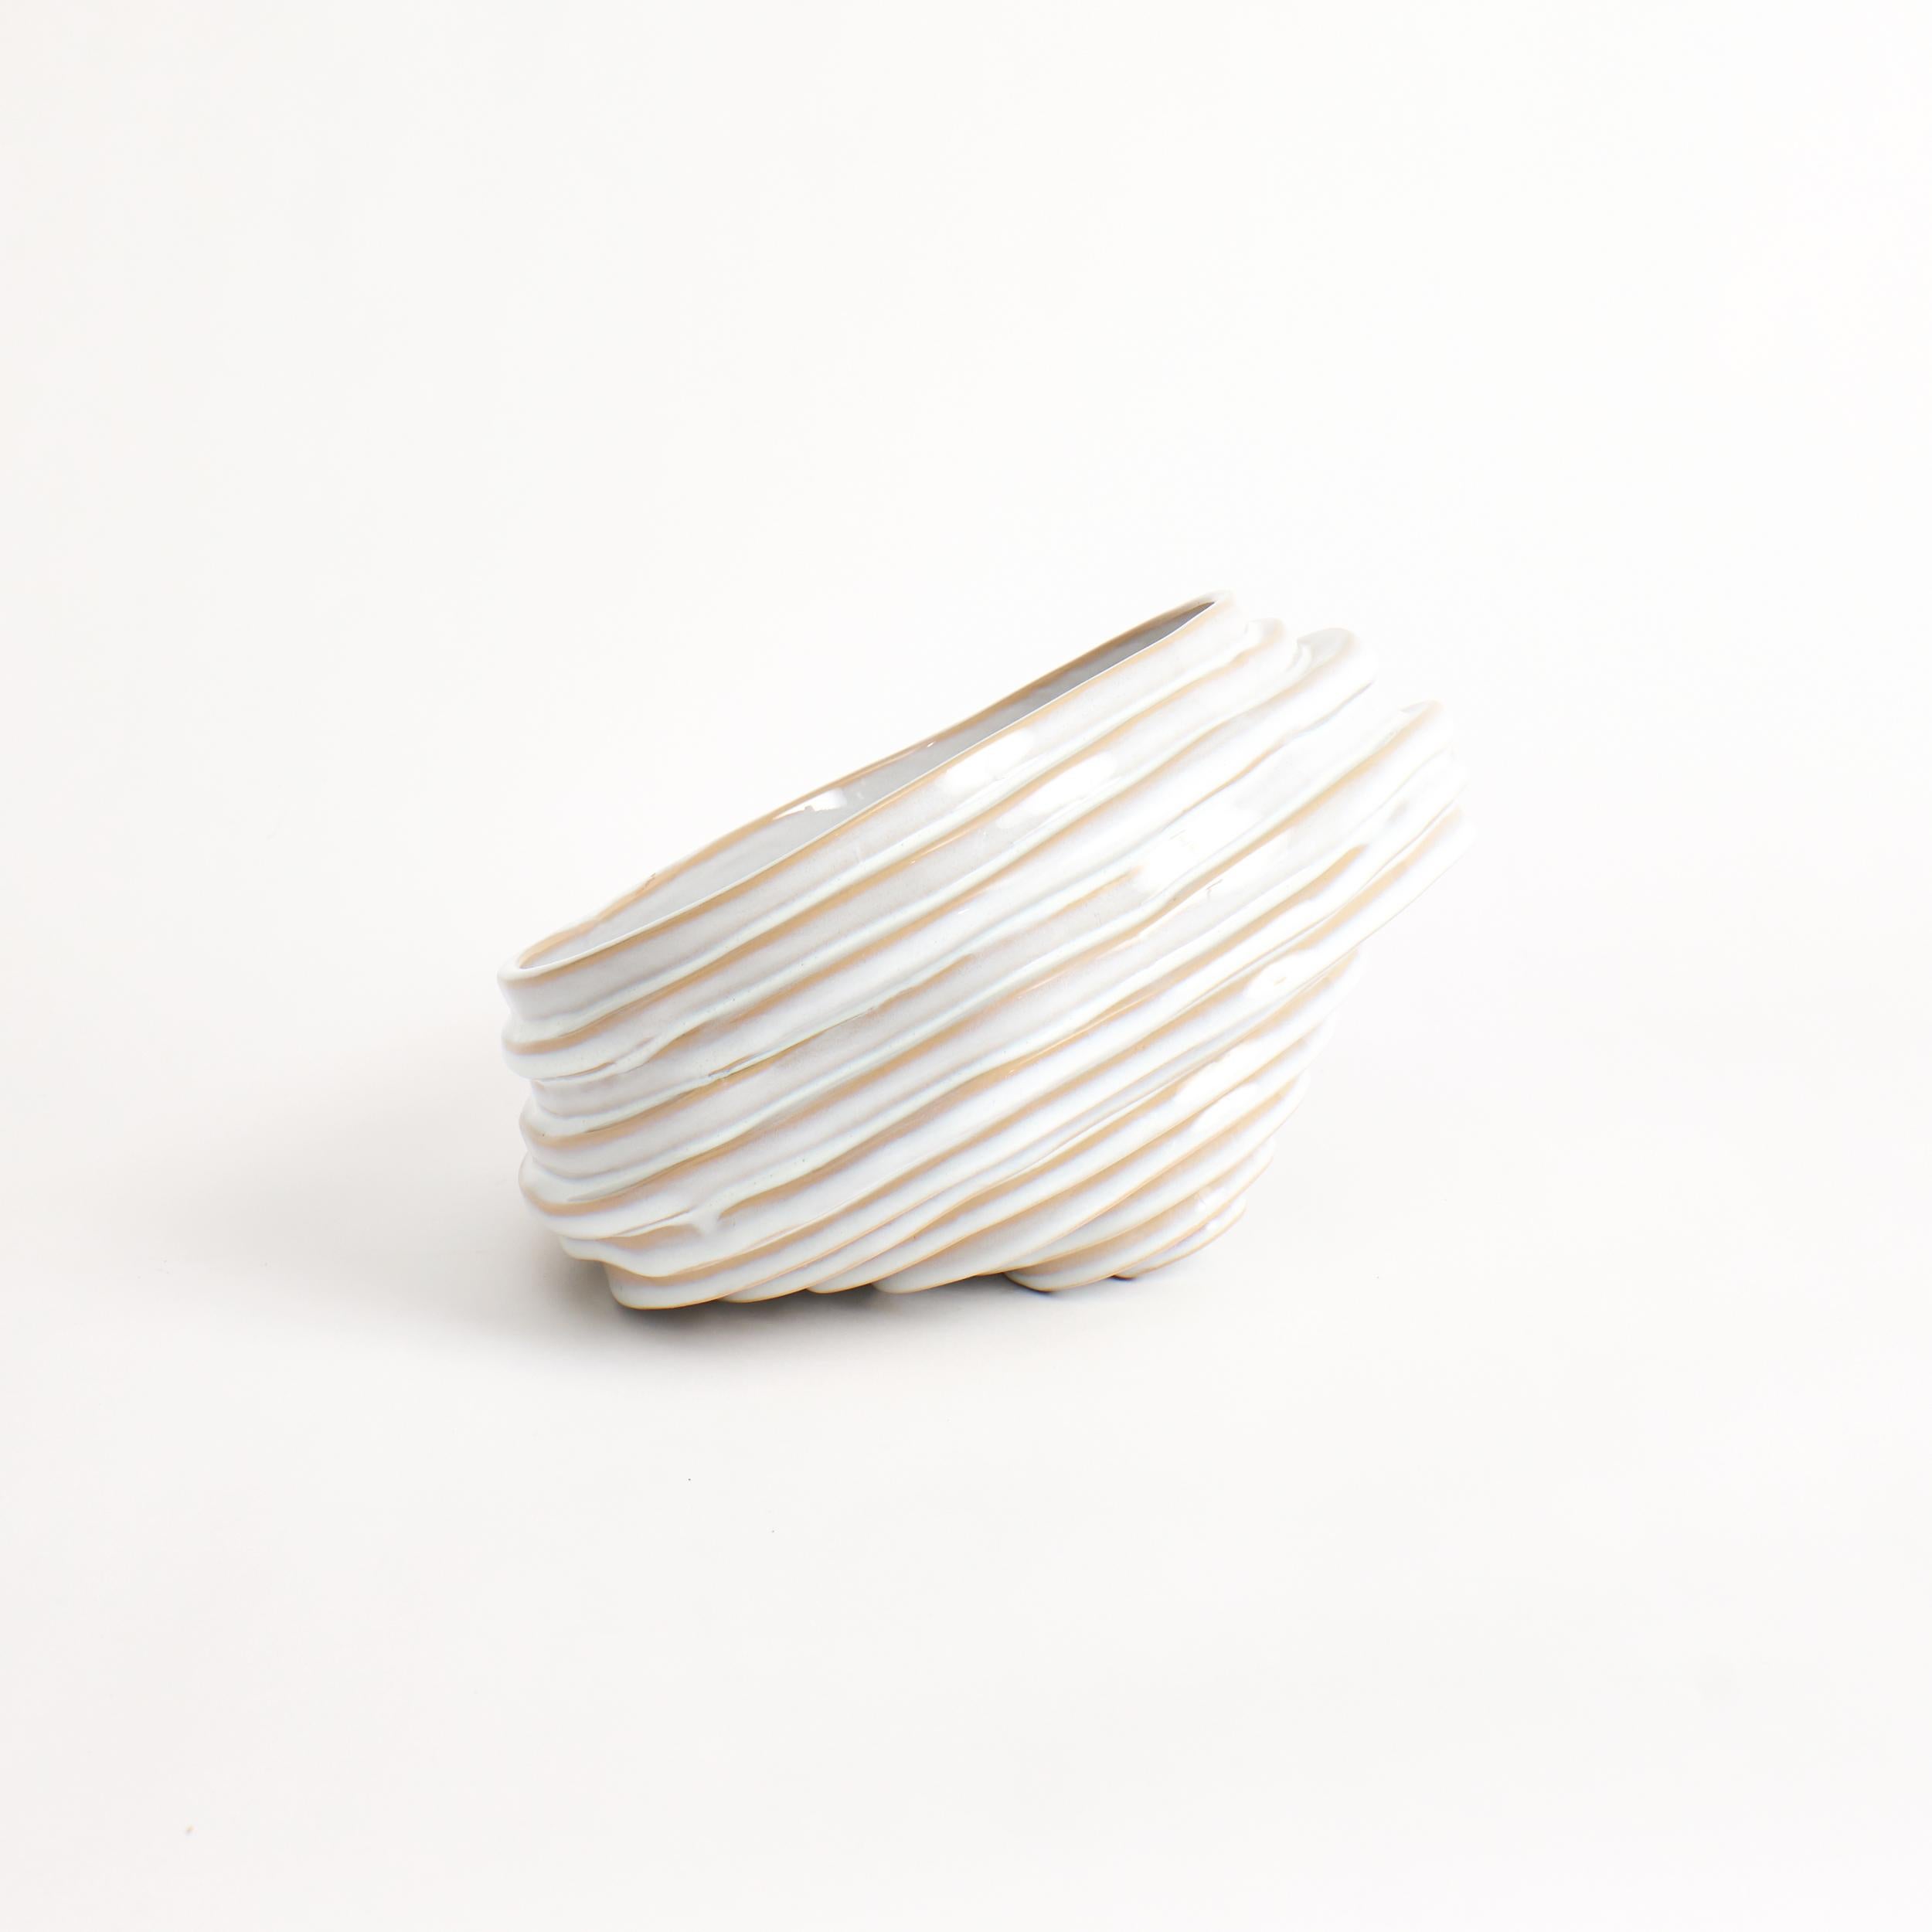 Alfonso Fruit Bowl in Shiny White

Designed by Project 213A in 2021

Handmade Stoneware

This tilting designed piece is part of the Alfonso range, sculpted by organically displacing several individual layers. This shiny white glaze appears in some